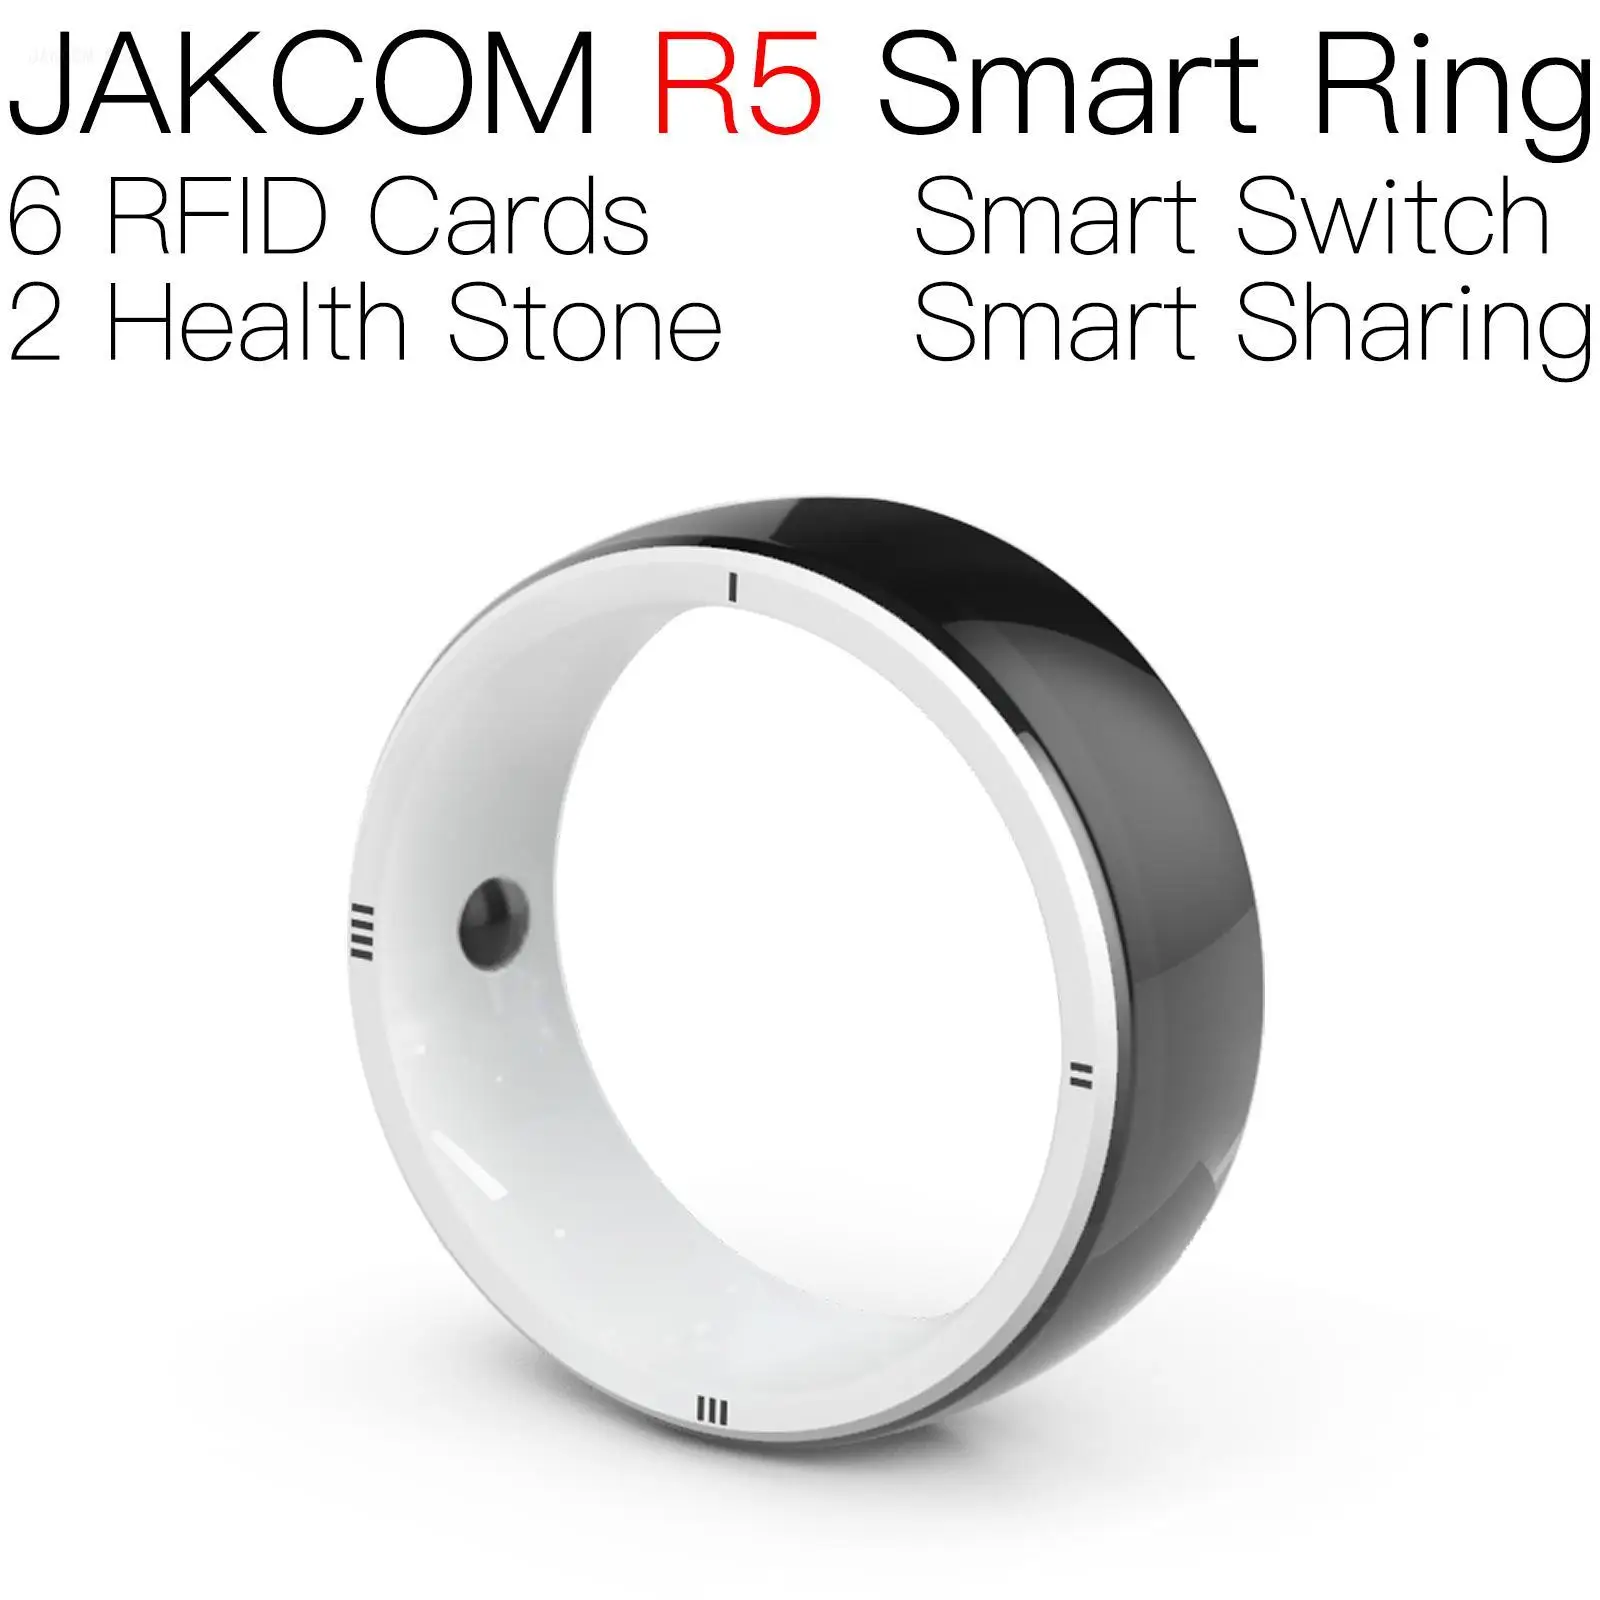 

JAKCOM R5 Smart Ring Super value than smart microchip rfid electronic id tags hf uhf nfc classic 1k s50 and h3 cip 125 khz copy